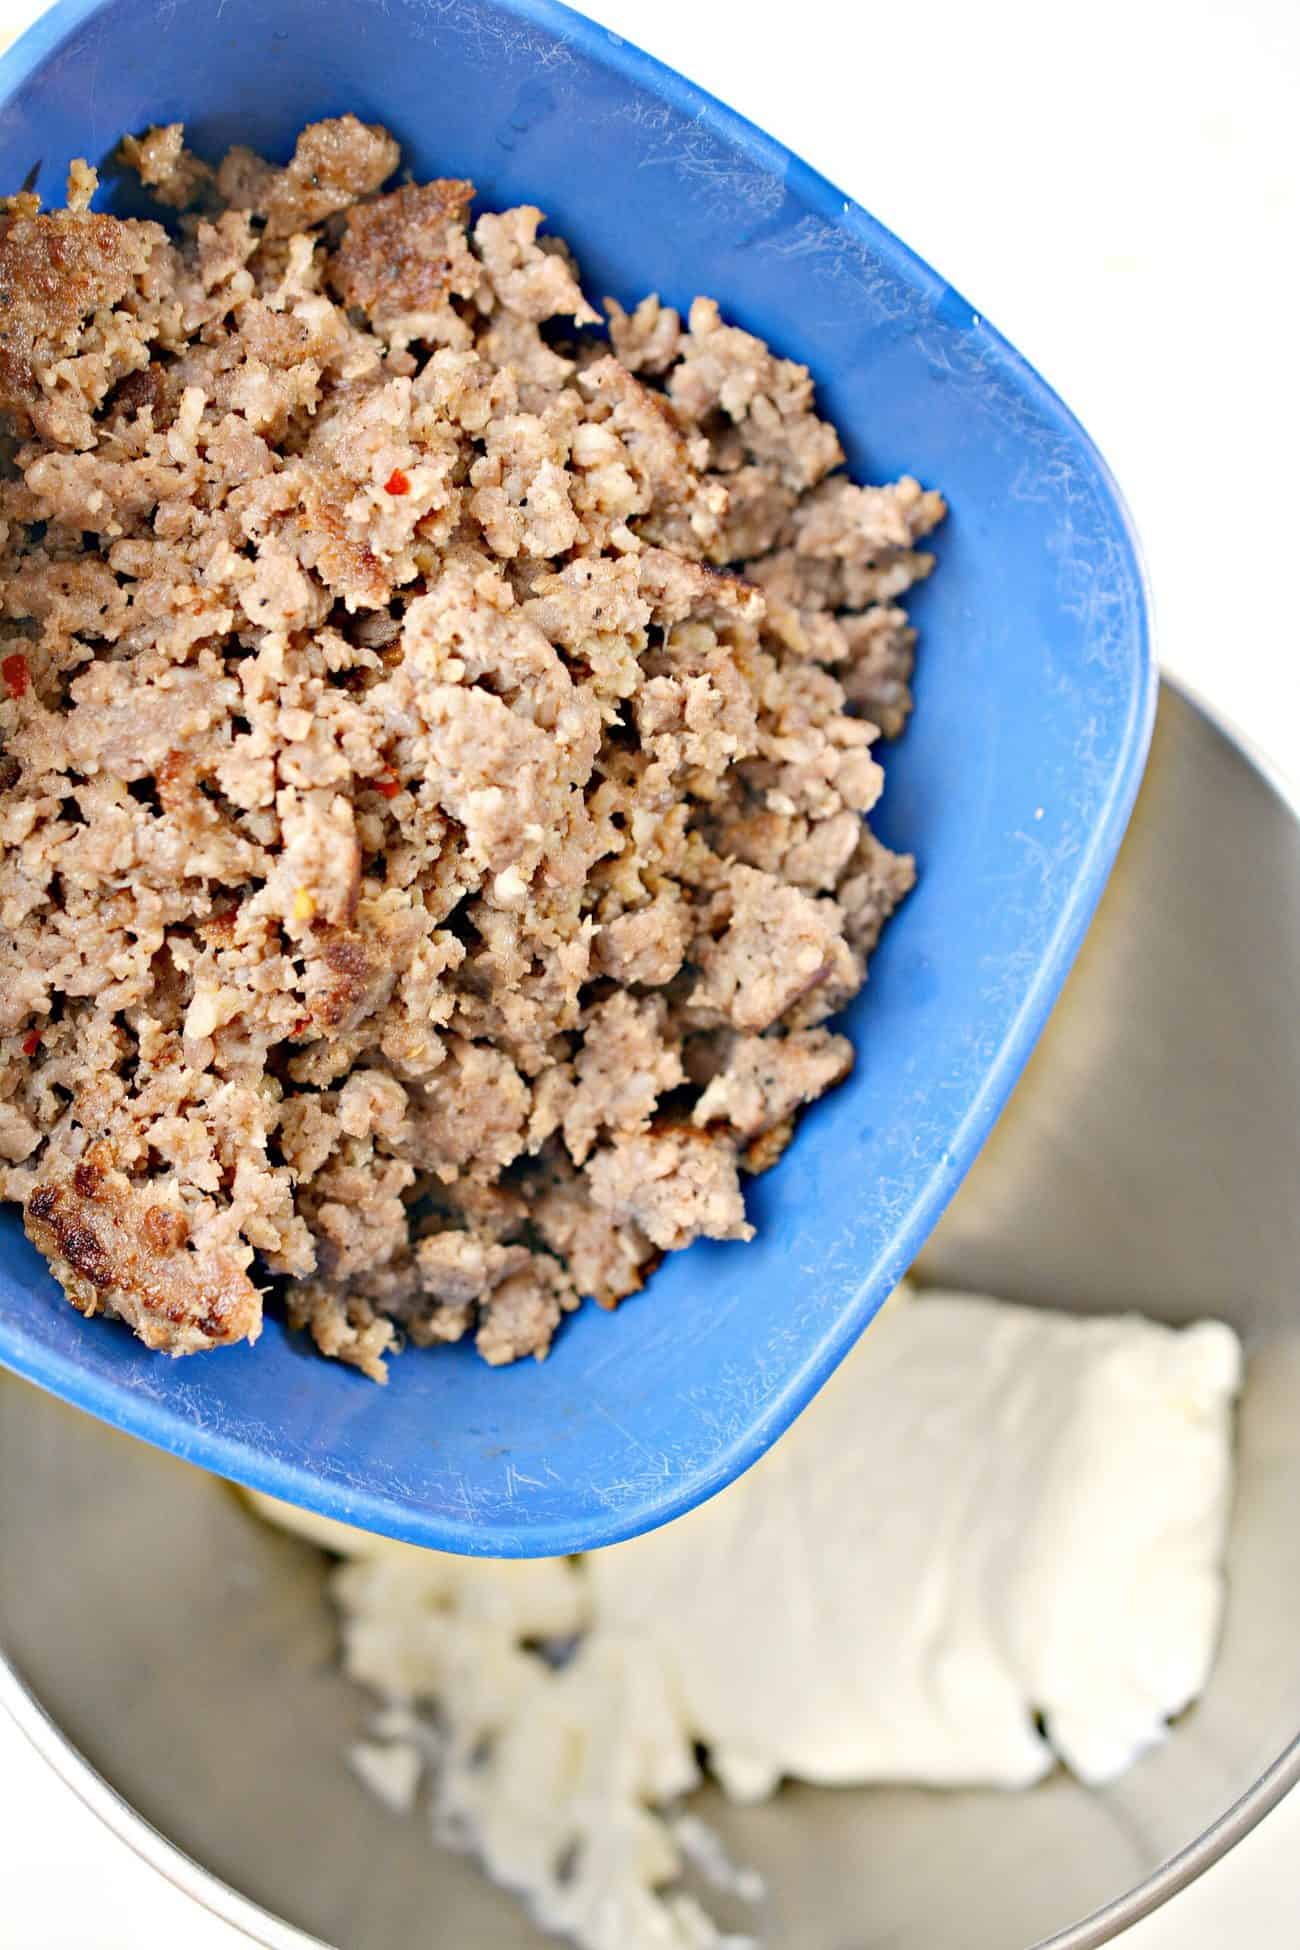 Add the cooled ground sausage to a mixing bowl with the cream cheese.